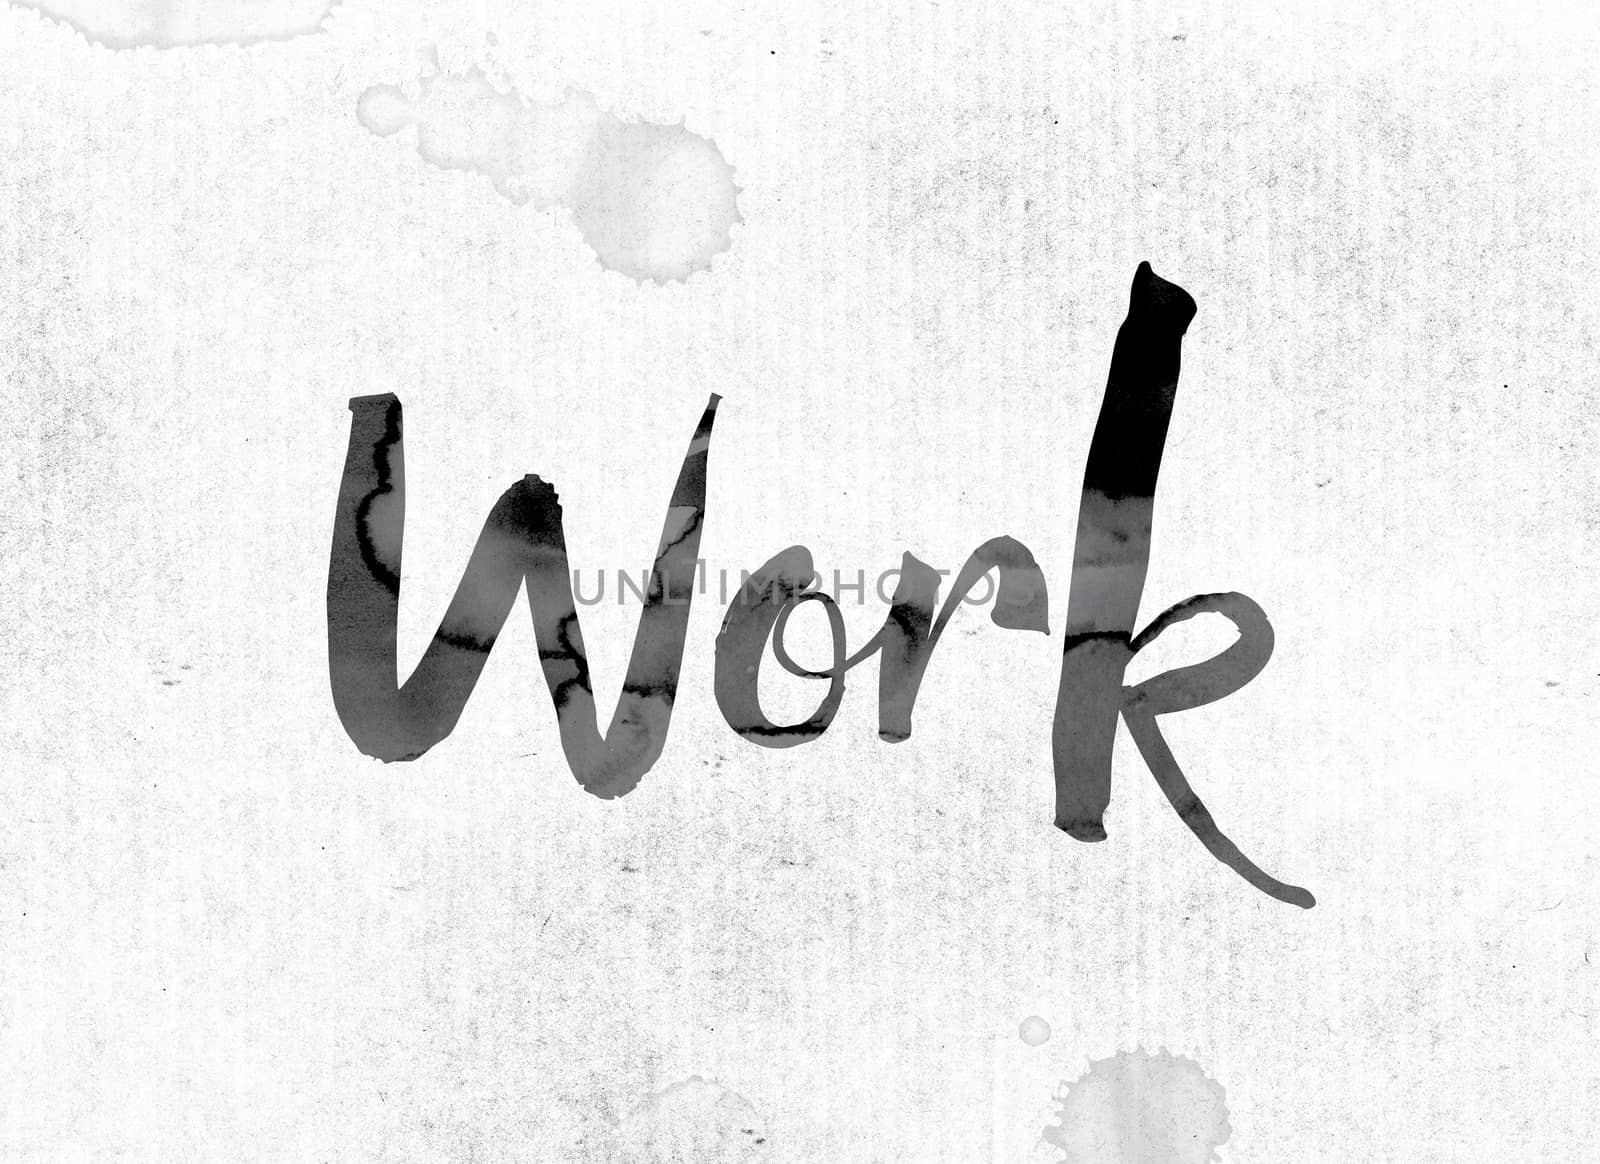 The word "Work" concept and theme painted in watercolor ink on a white paper.